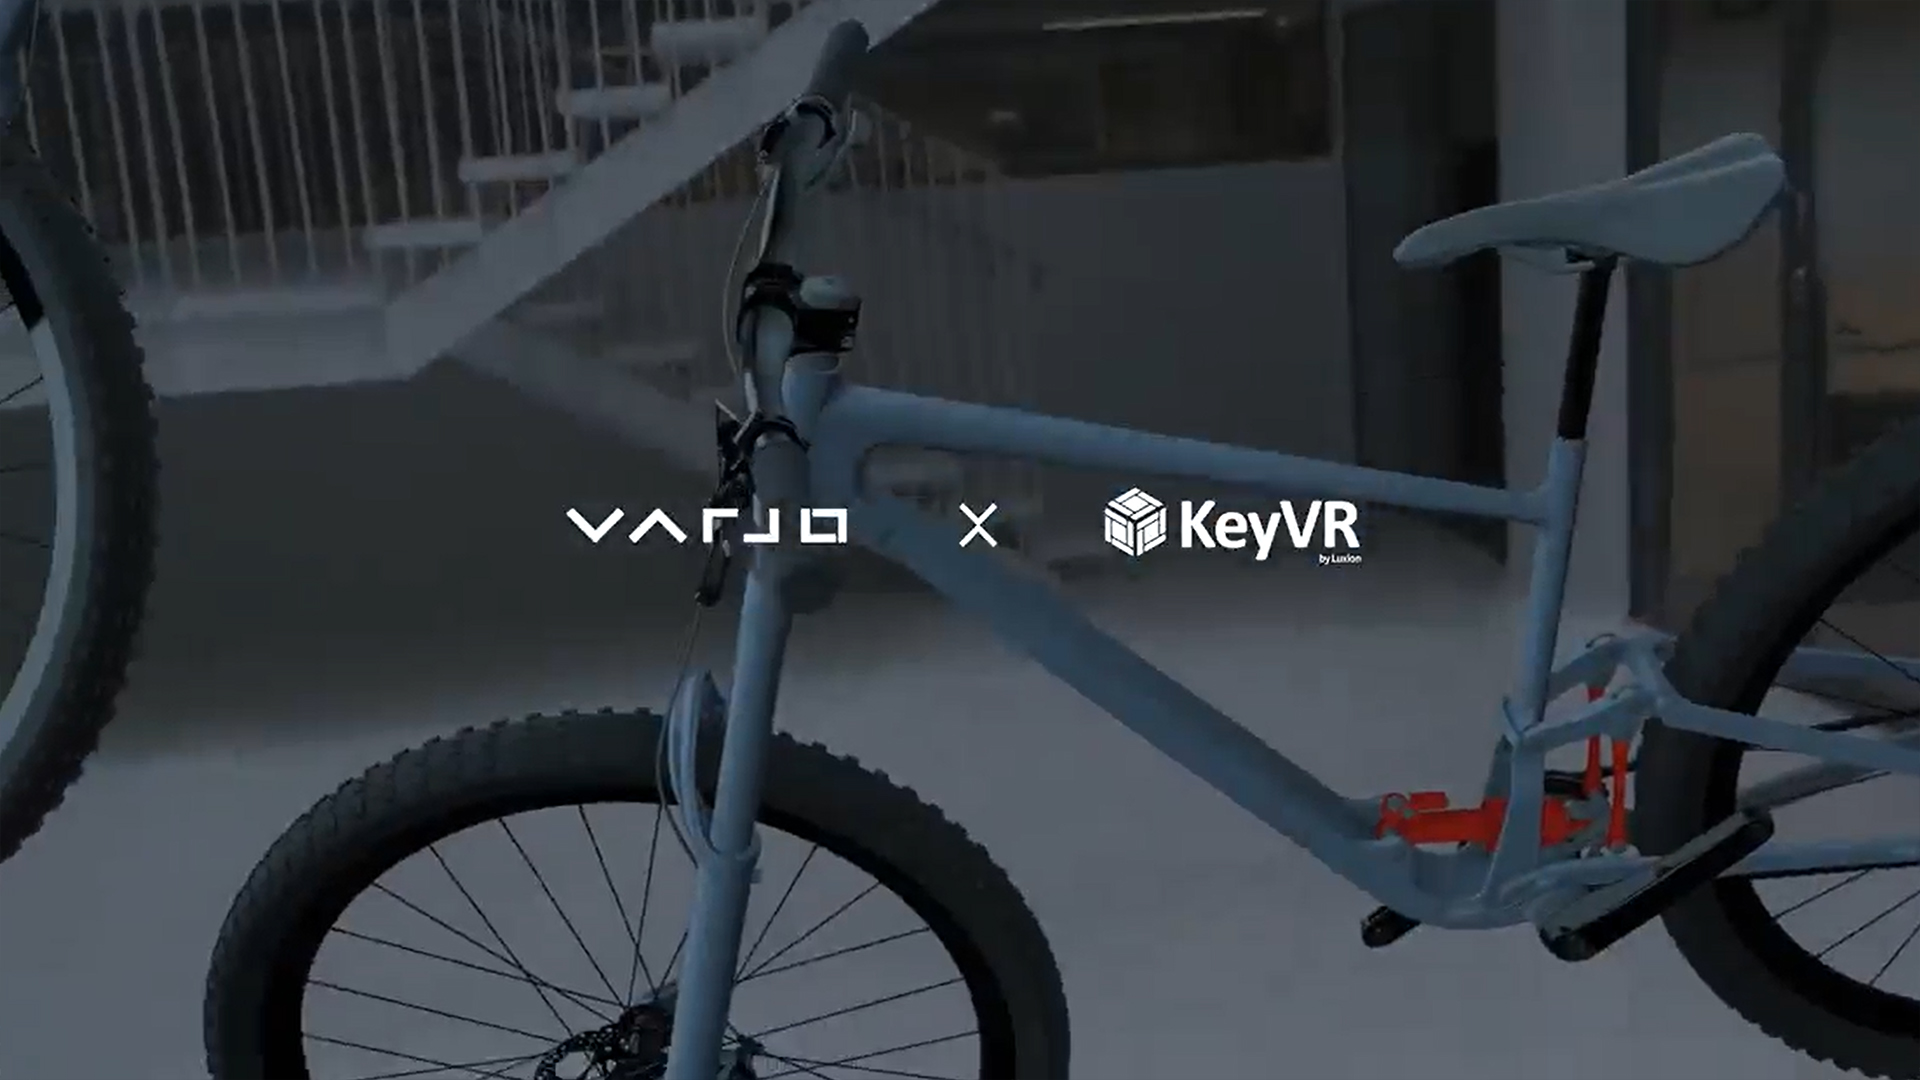 The Latest Mixed Reality Experience with Varjo and KeyVR